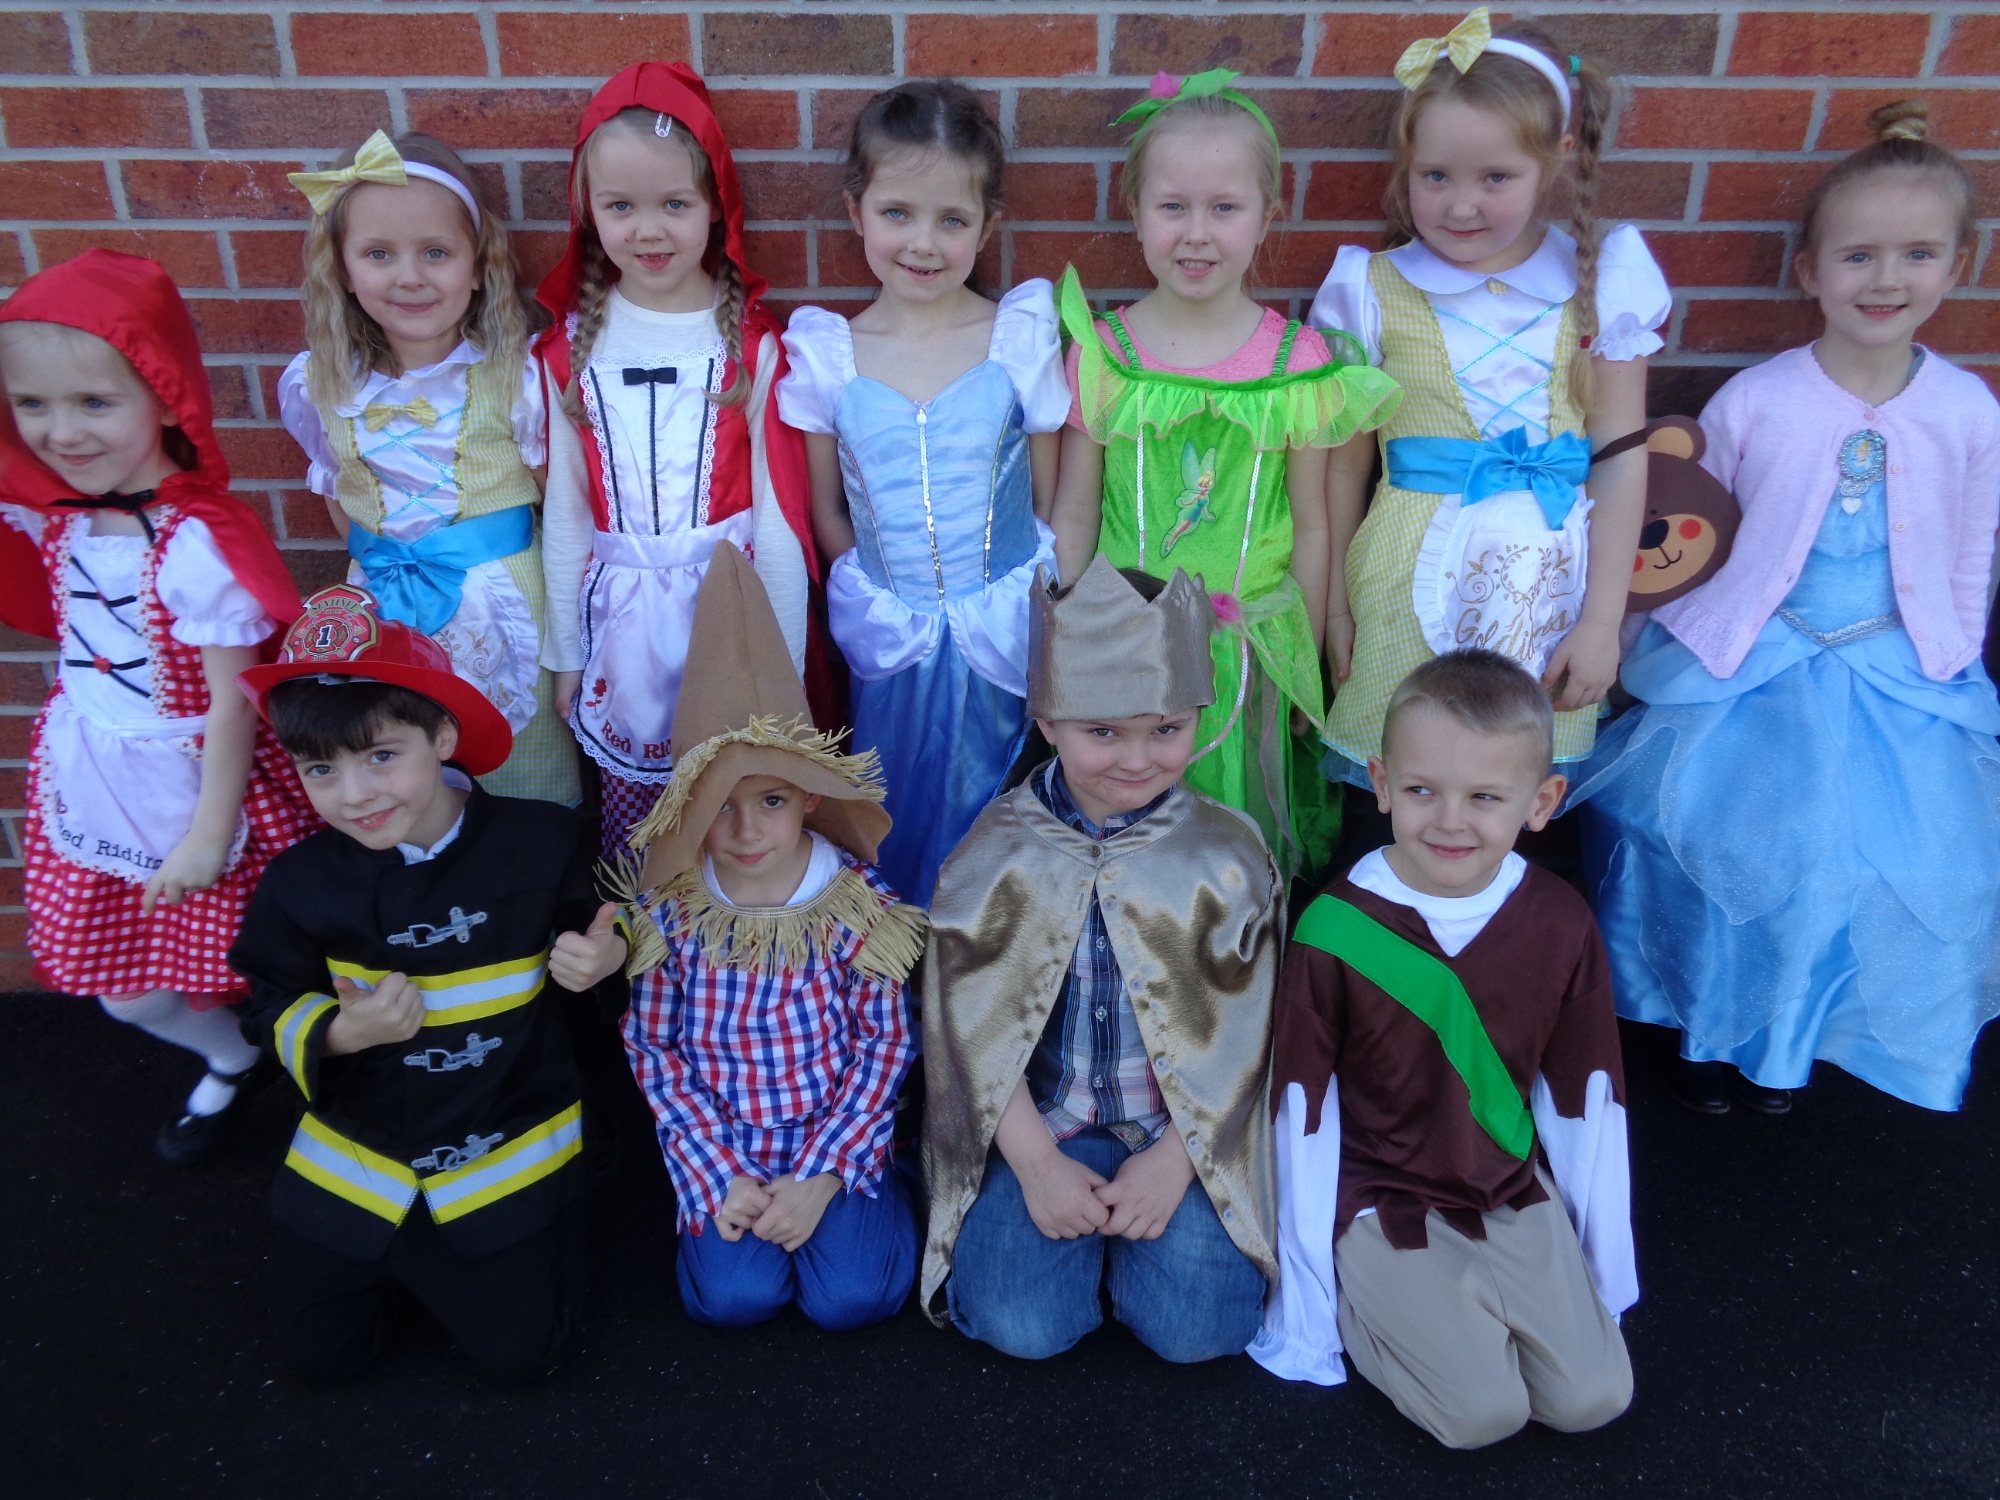 Holgate Primary and Nursery - Year 1's Fairy Tale Day!